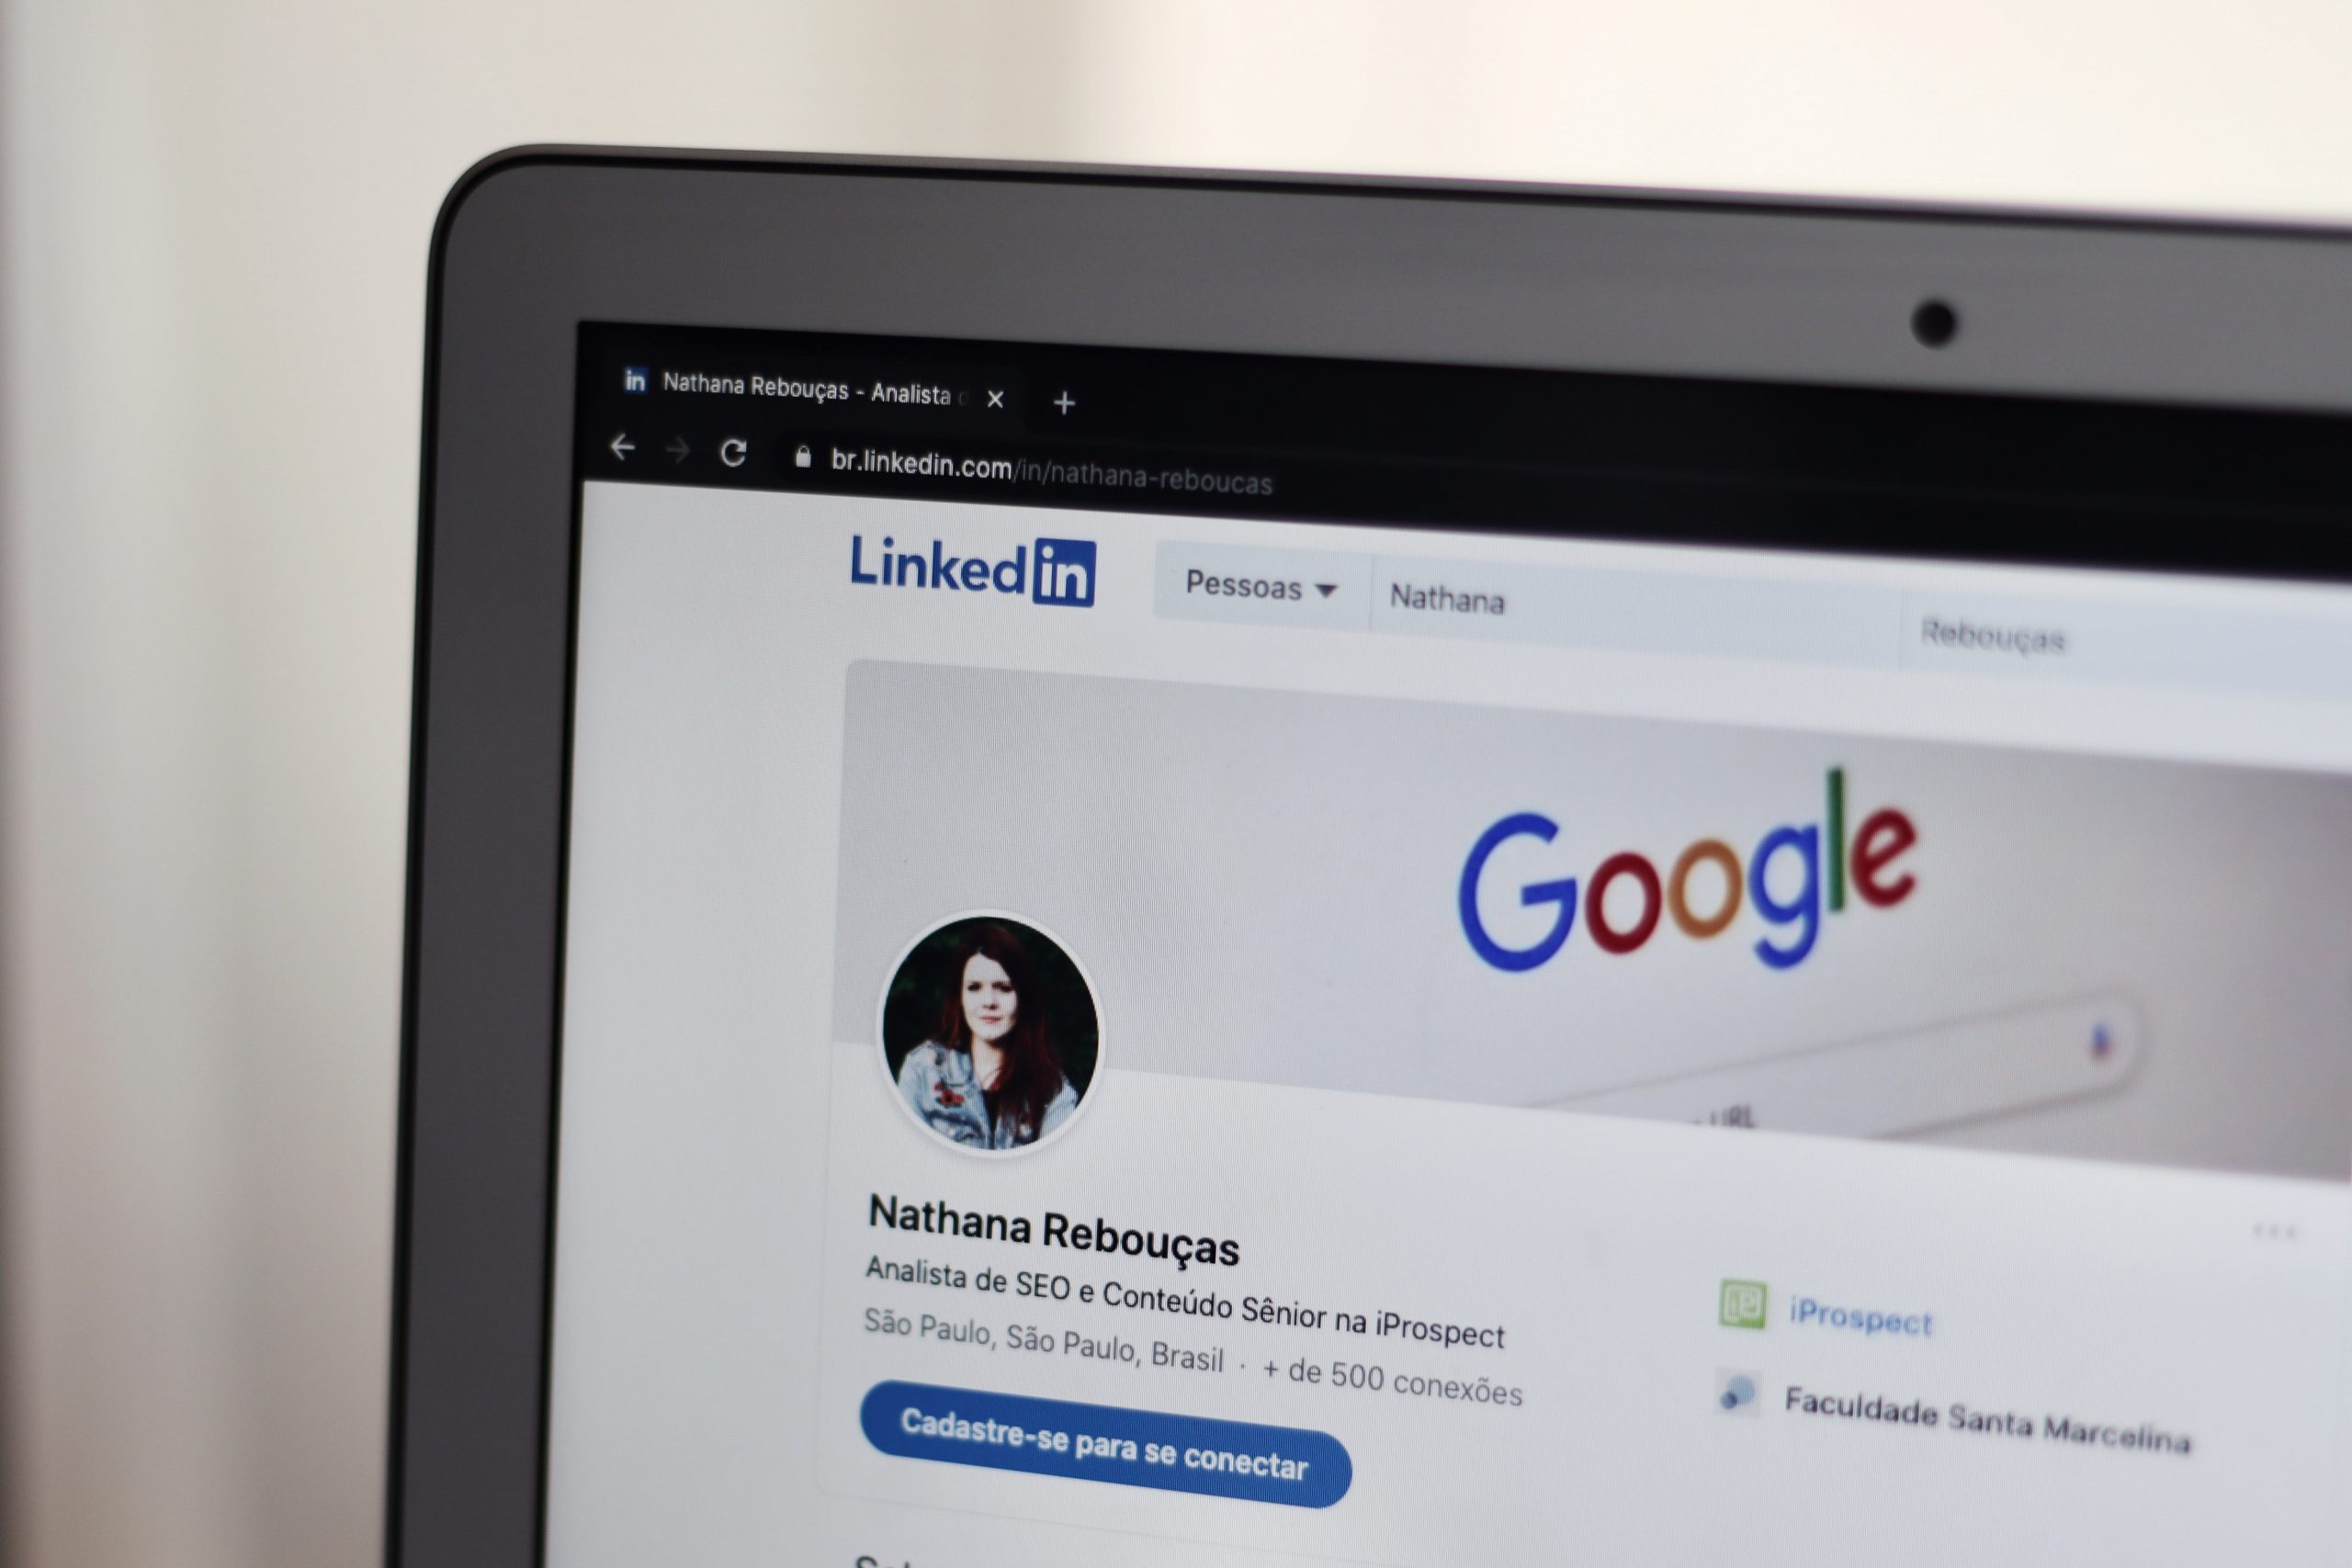 How to Use LinkedIn to Build Your Business